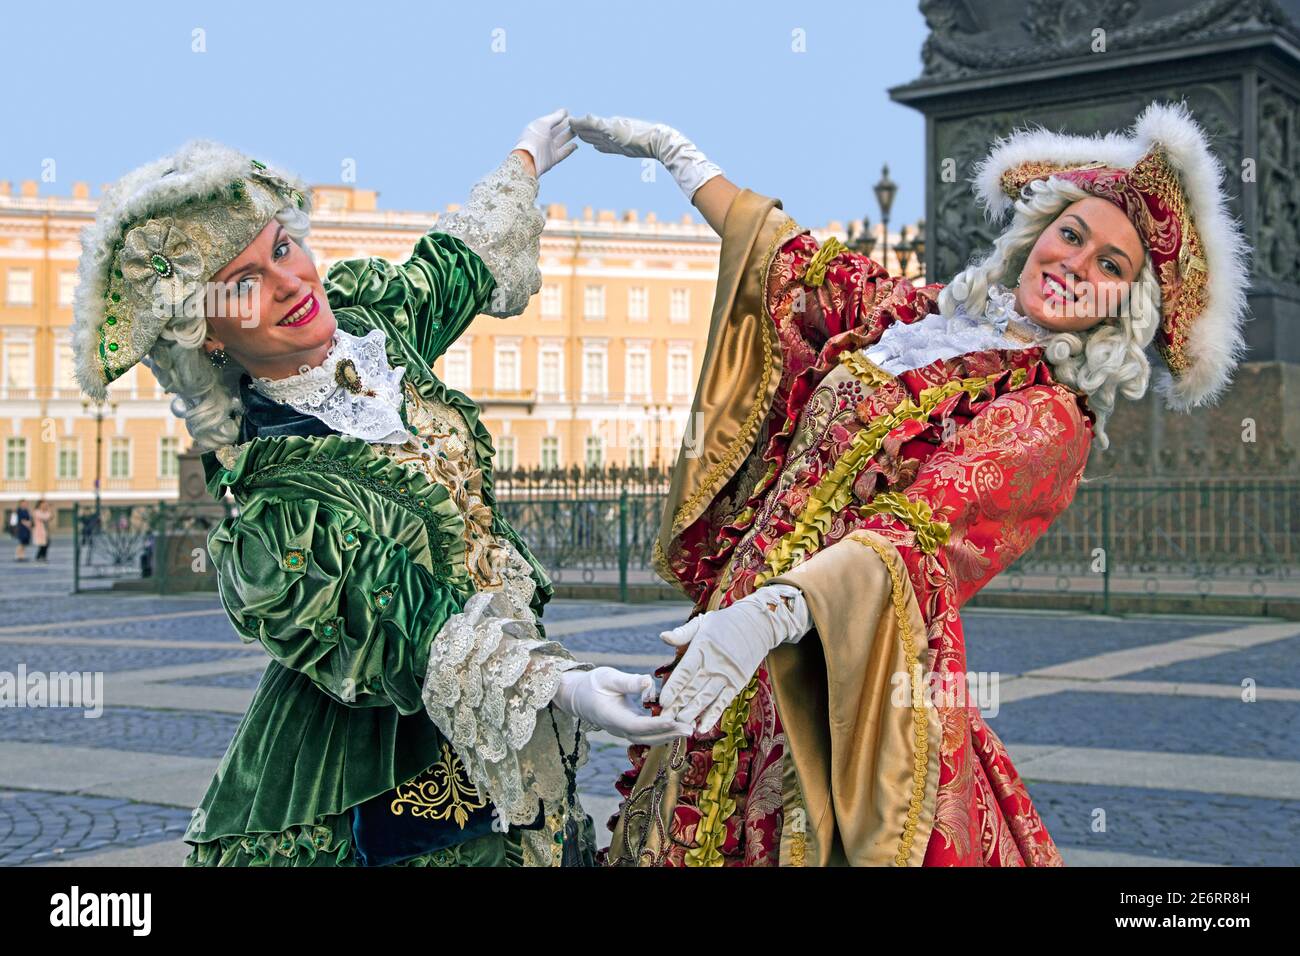 Two Russian women in 18th century period dresses posing for tourists by the Hermitage Winter Palace on Palace Square in the city St Petersburg, Russia Stock Photo